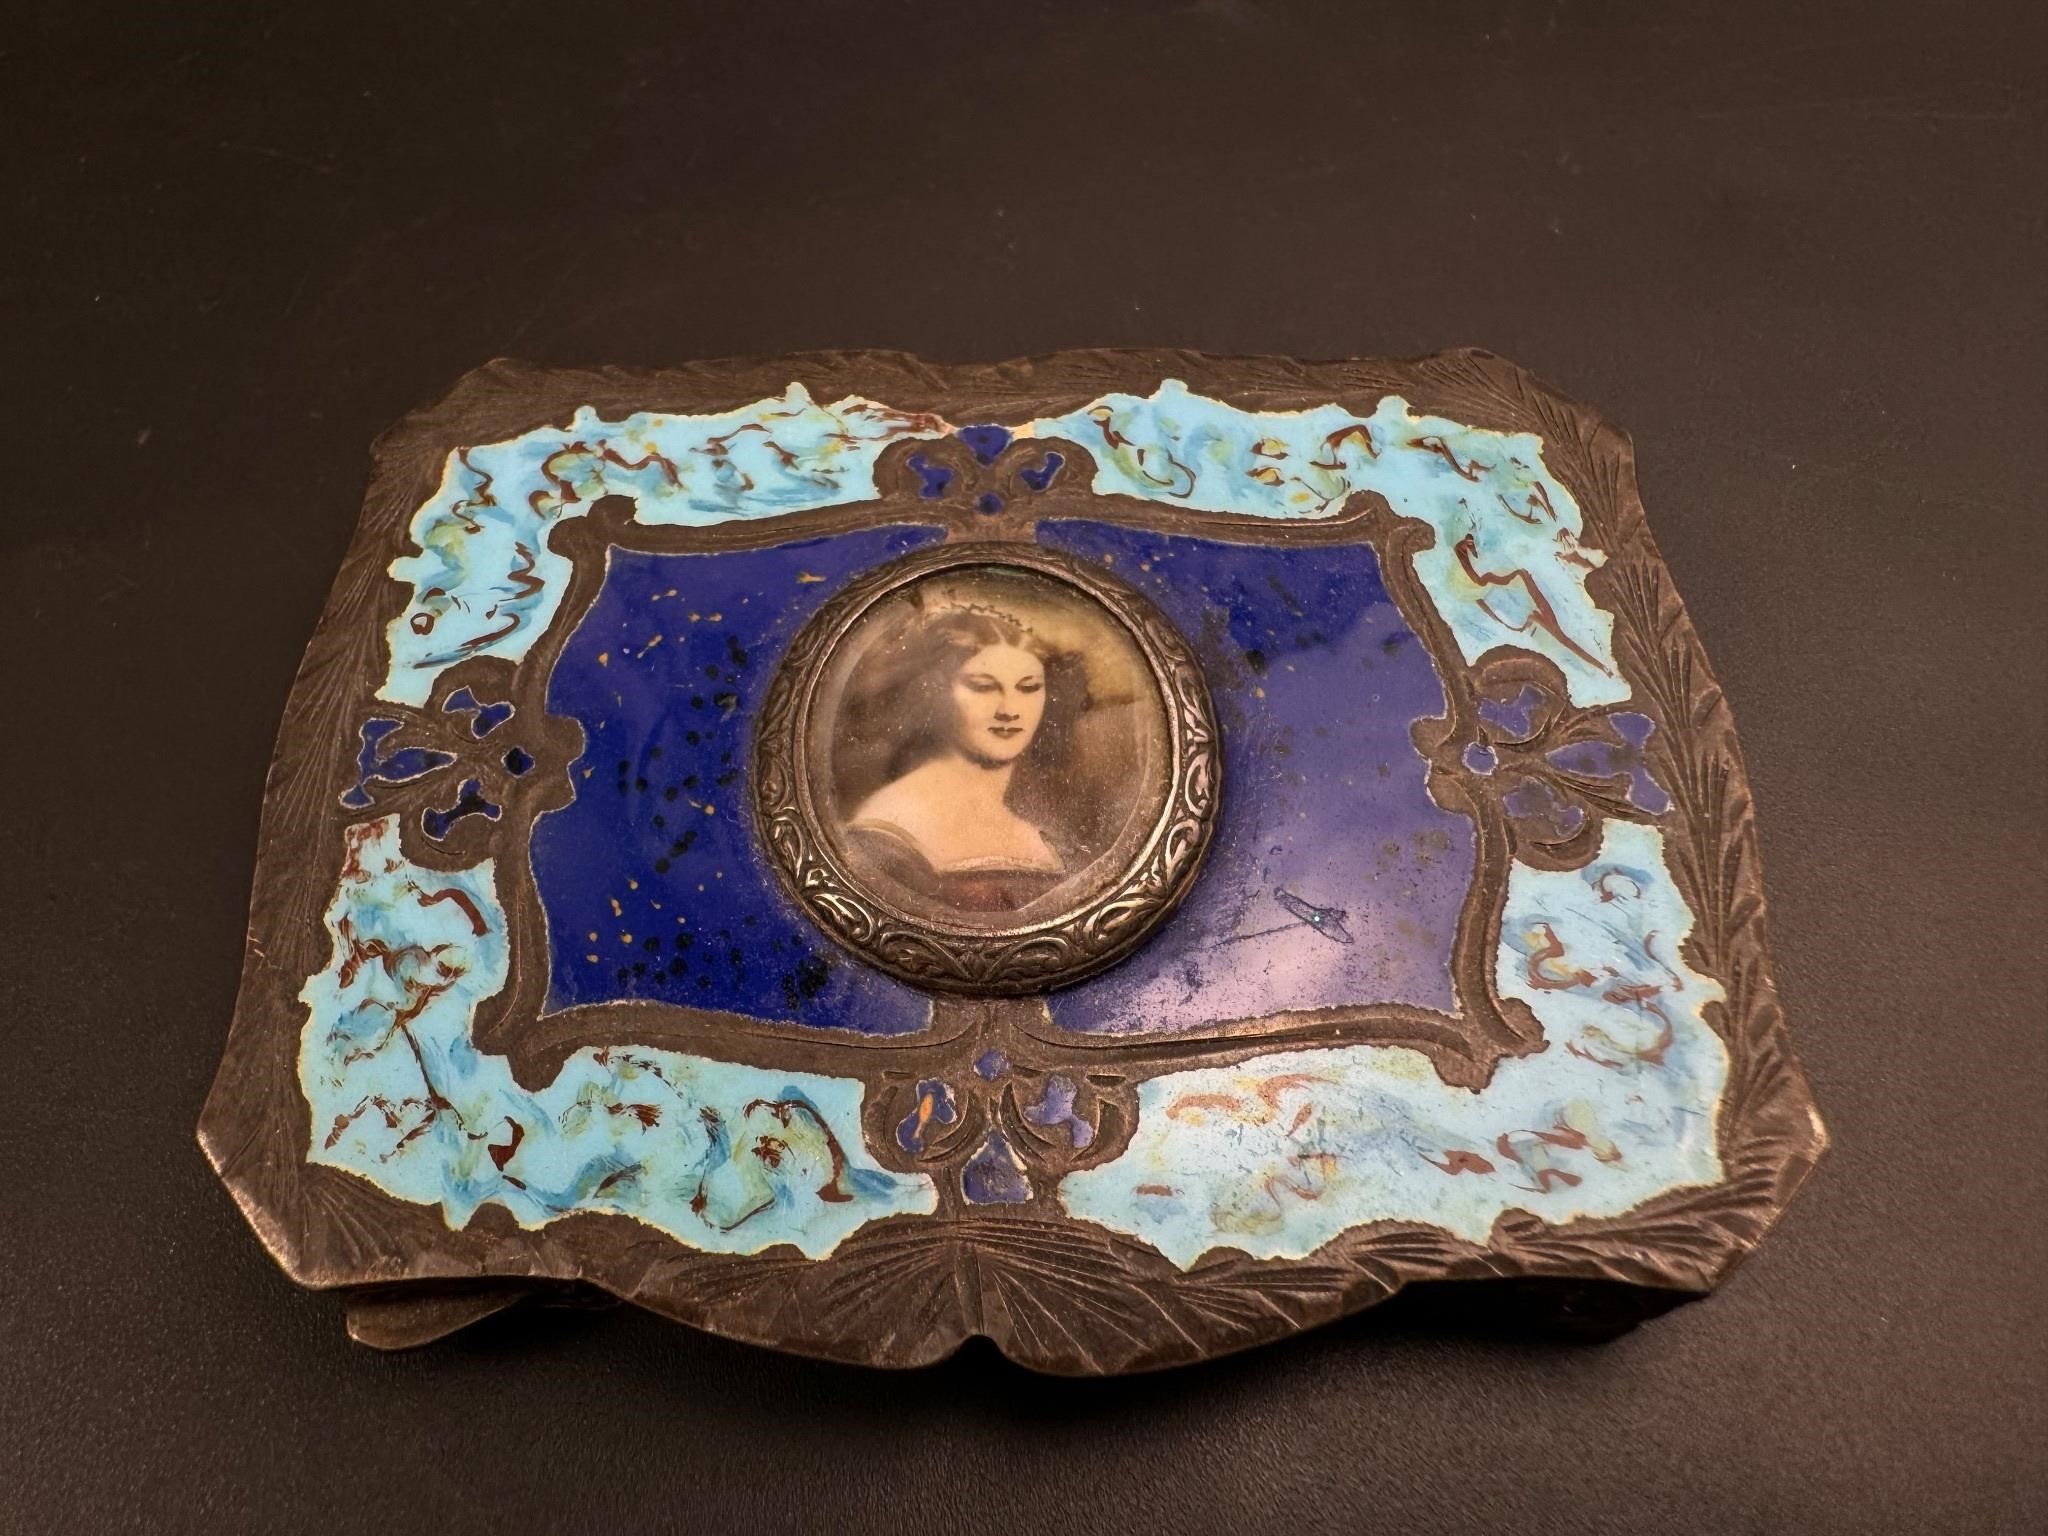 Vintage french Silver Enamel Compact